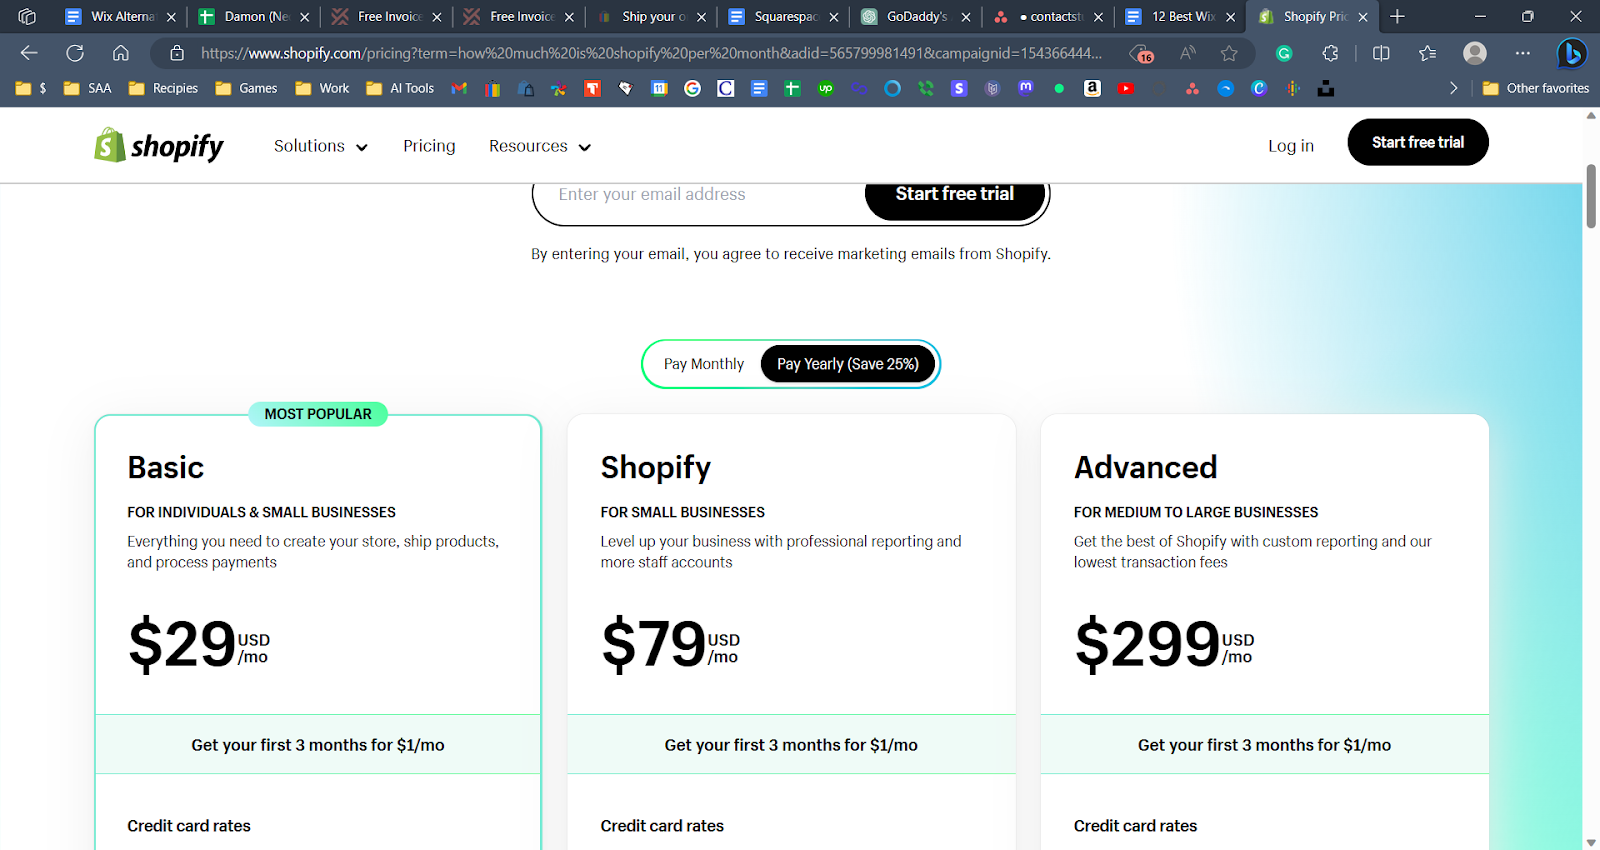 A screenshot of Shopify's pricing plans